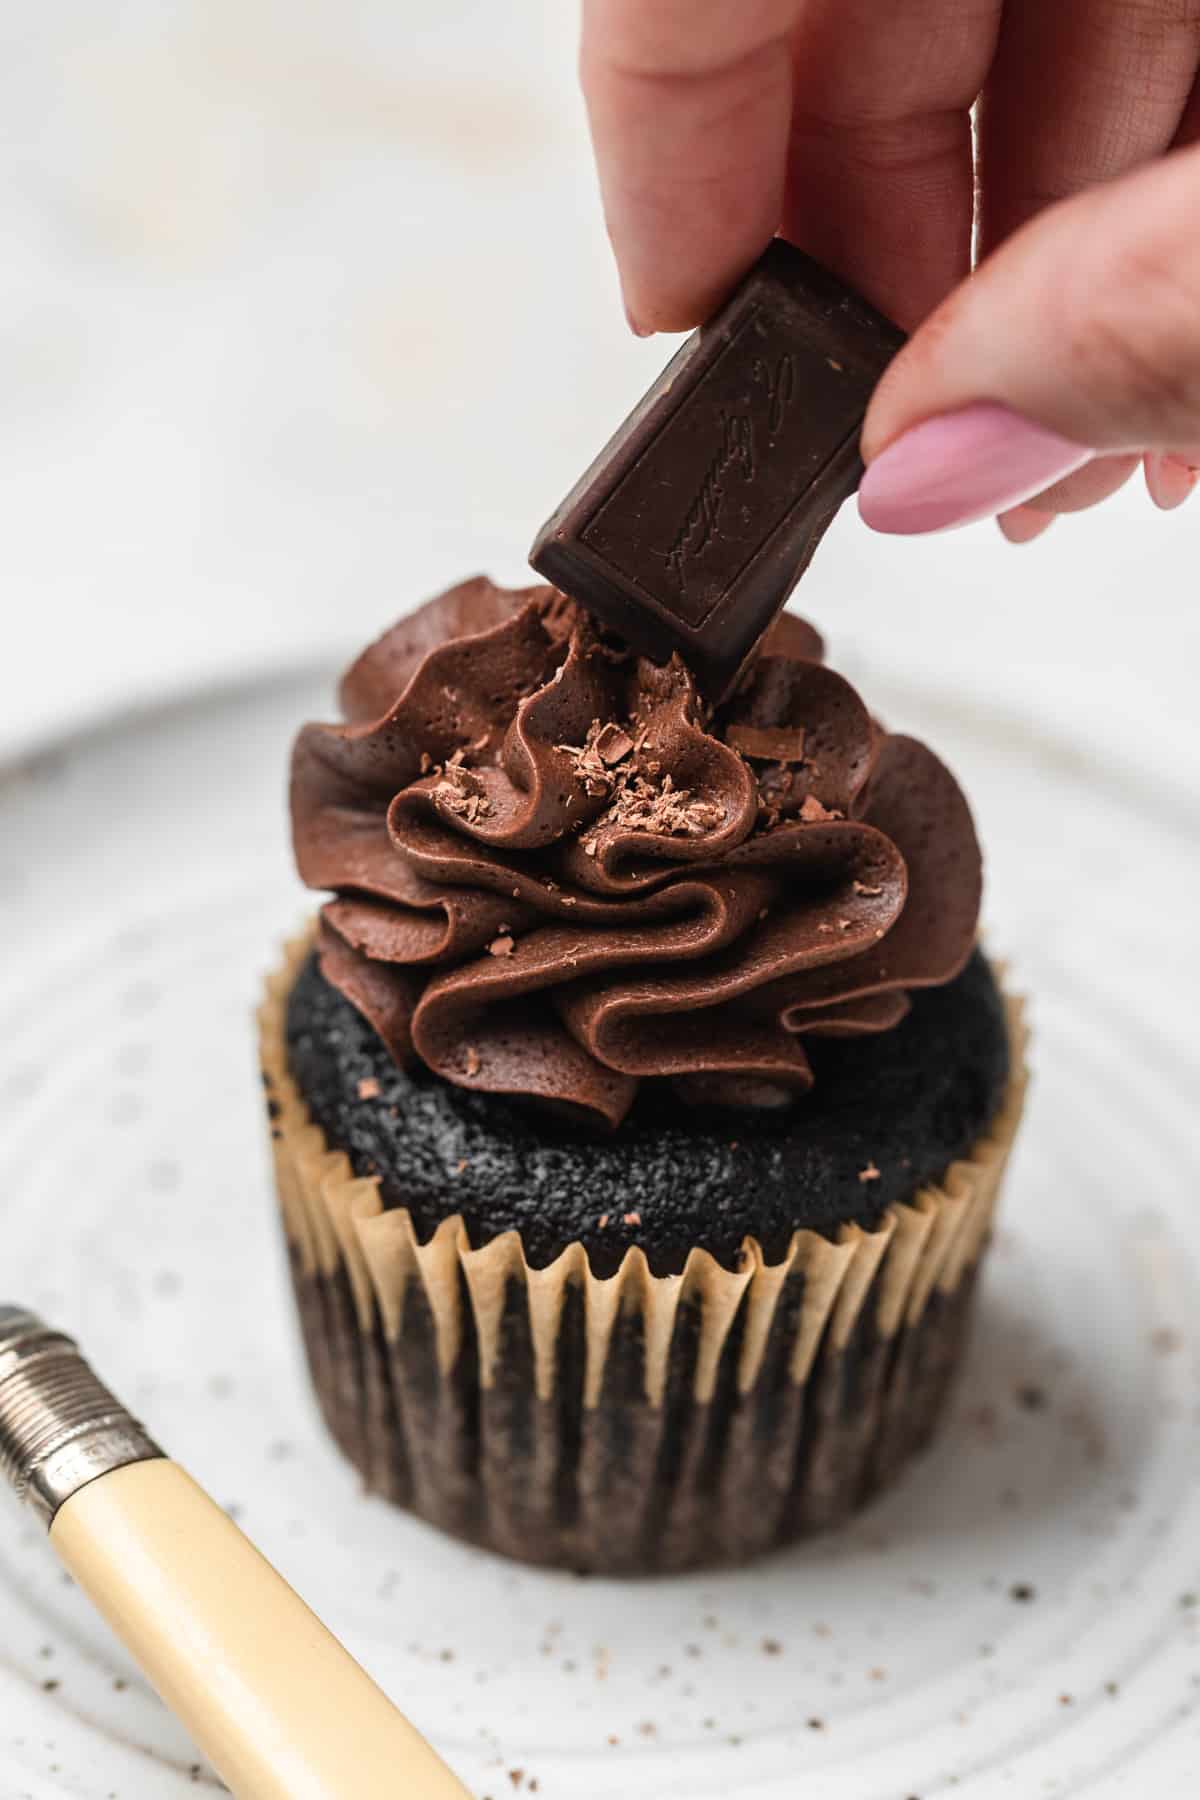 A chocolate cupcake with a piece of chocolate being placed on top.